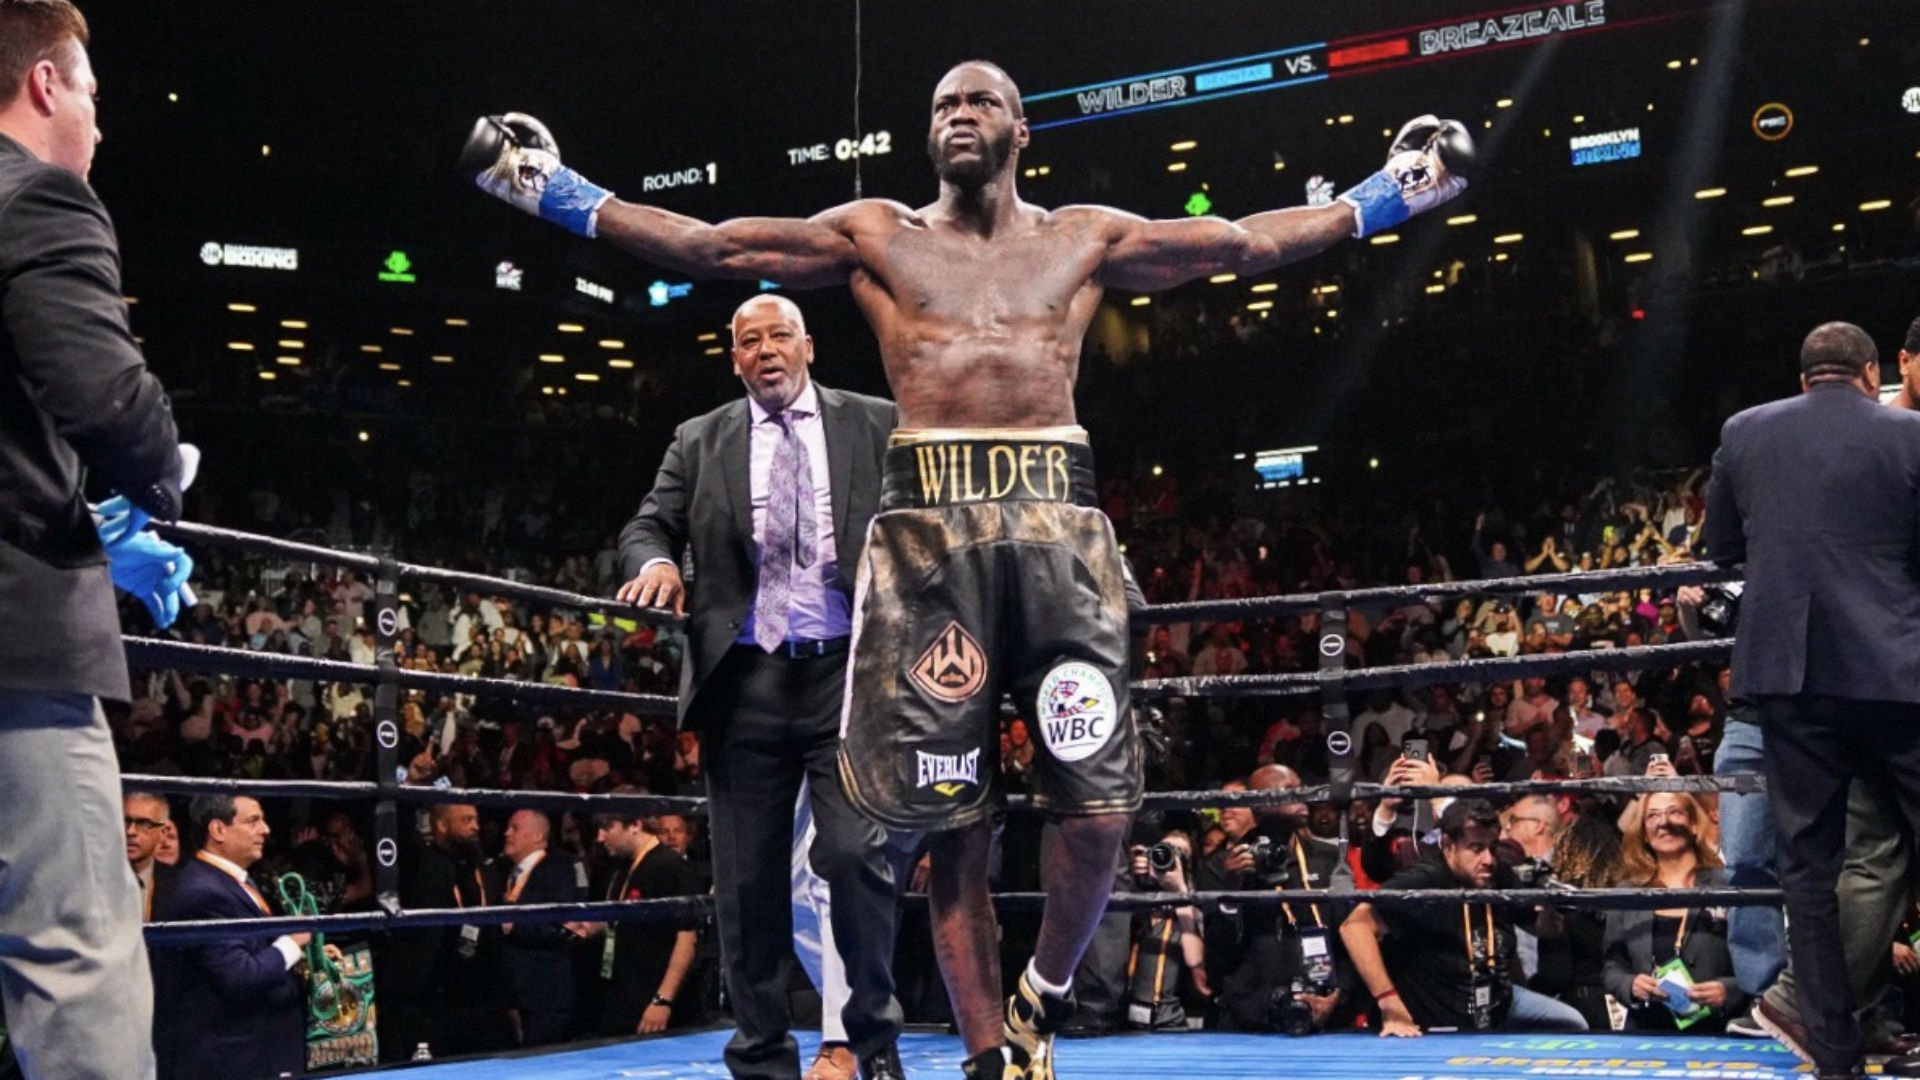 What we learned from Deontay Wilder's 1st-round knockout of Dominic Breazeale - The Ring